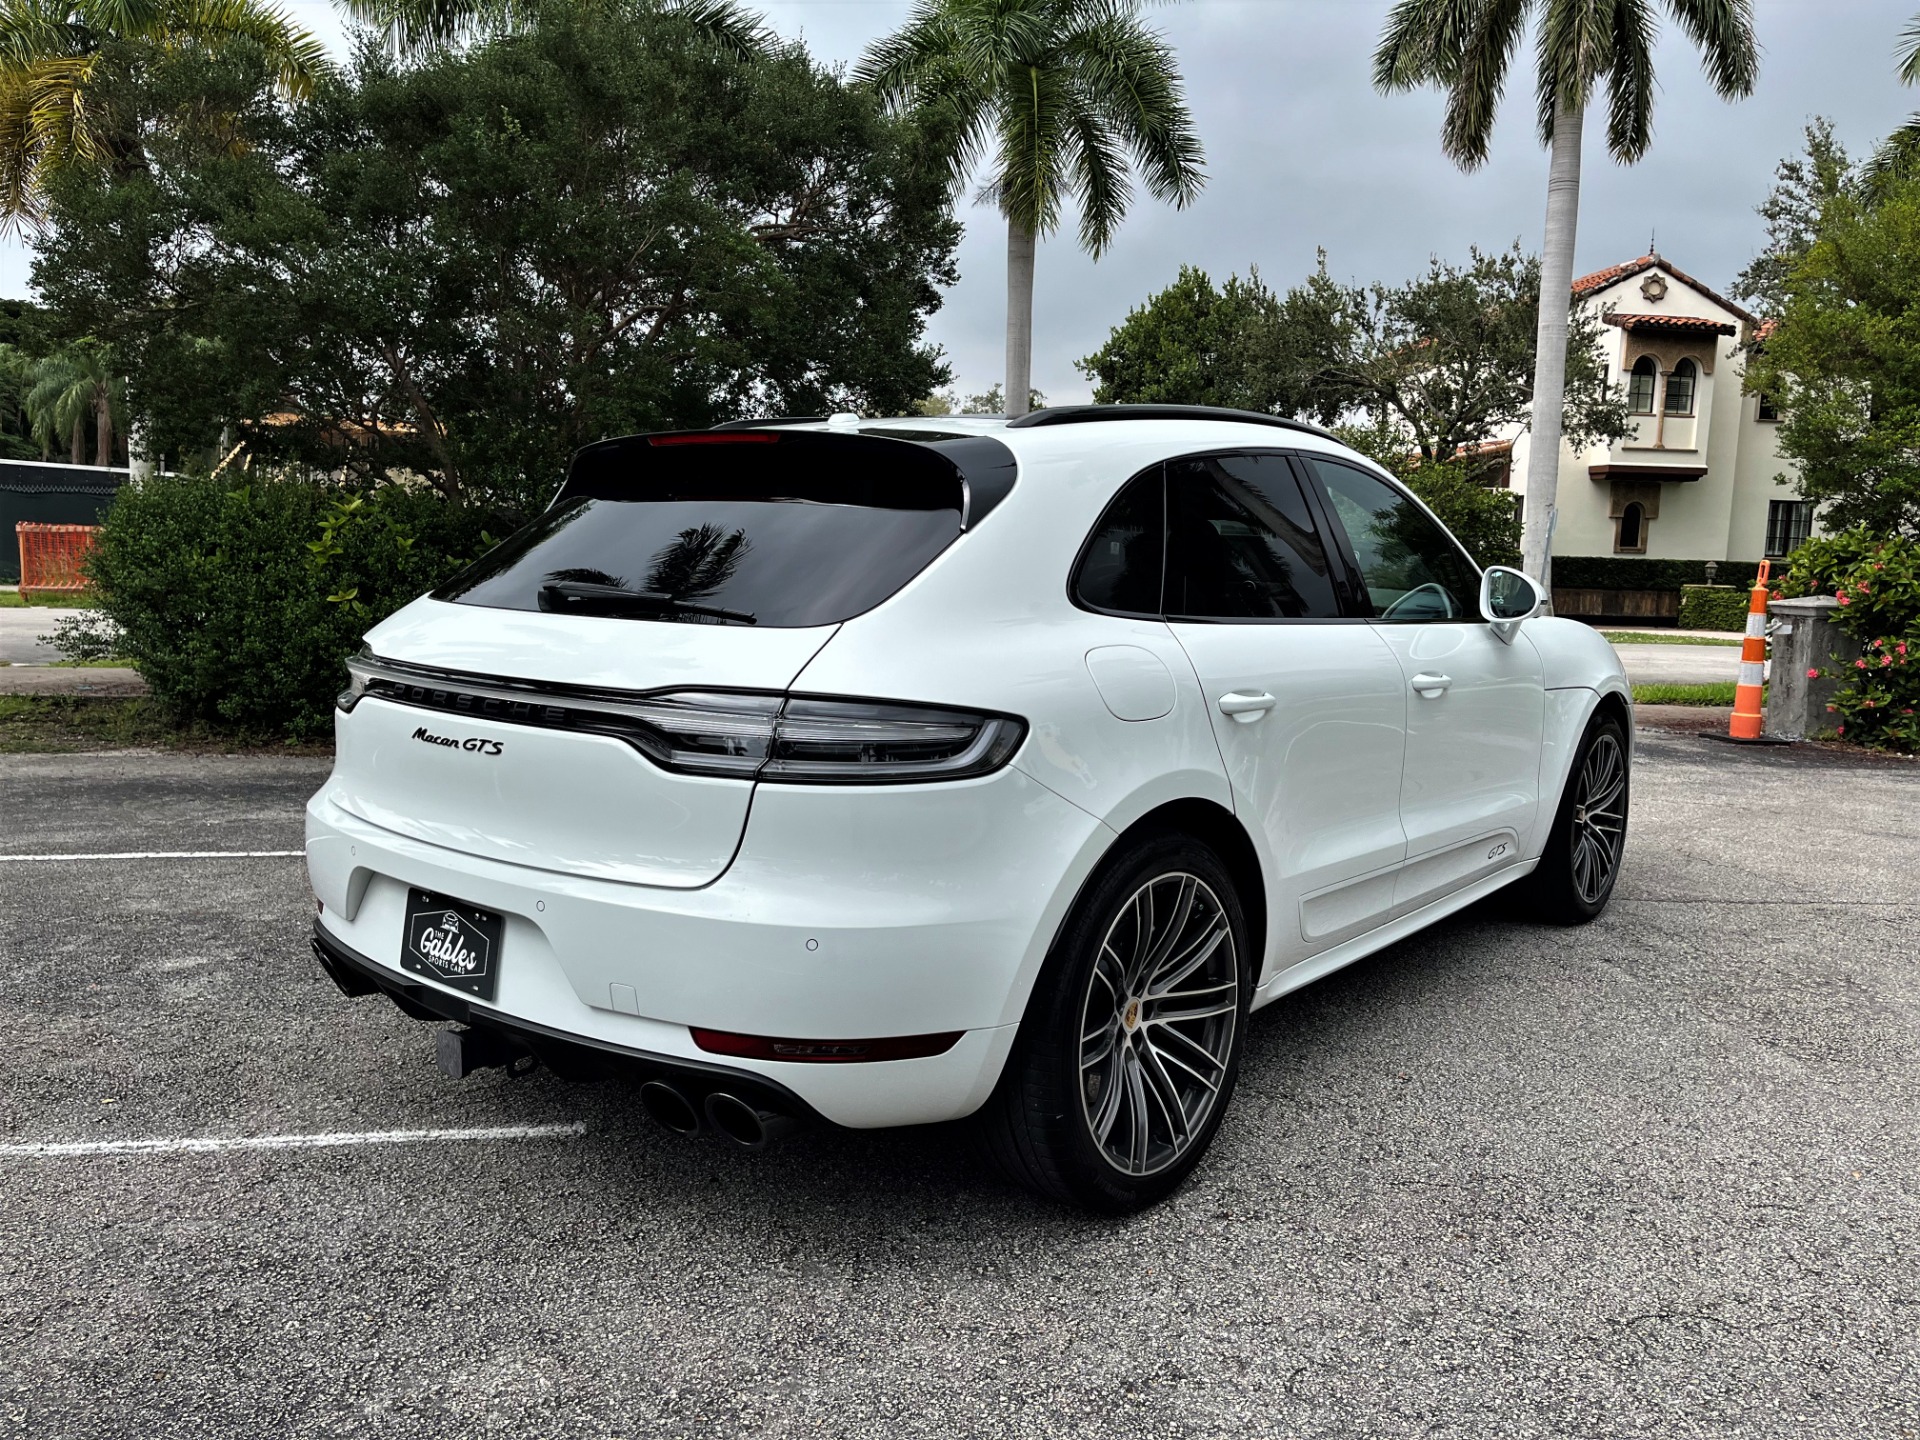 Used 2021 Porsche Macan GTS for sale $79,850 at The Gables Sports Cars in Miami FL 33146 4